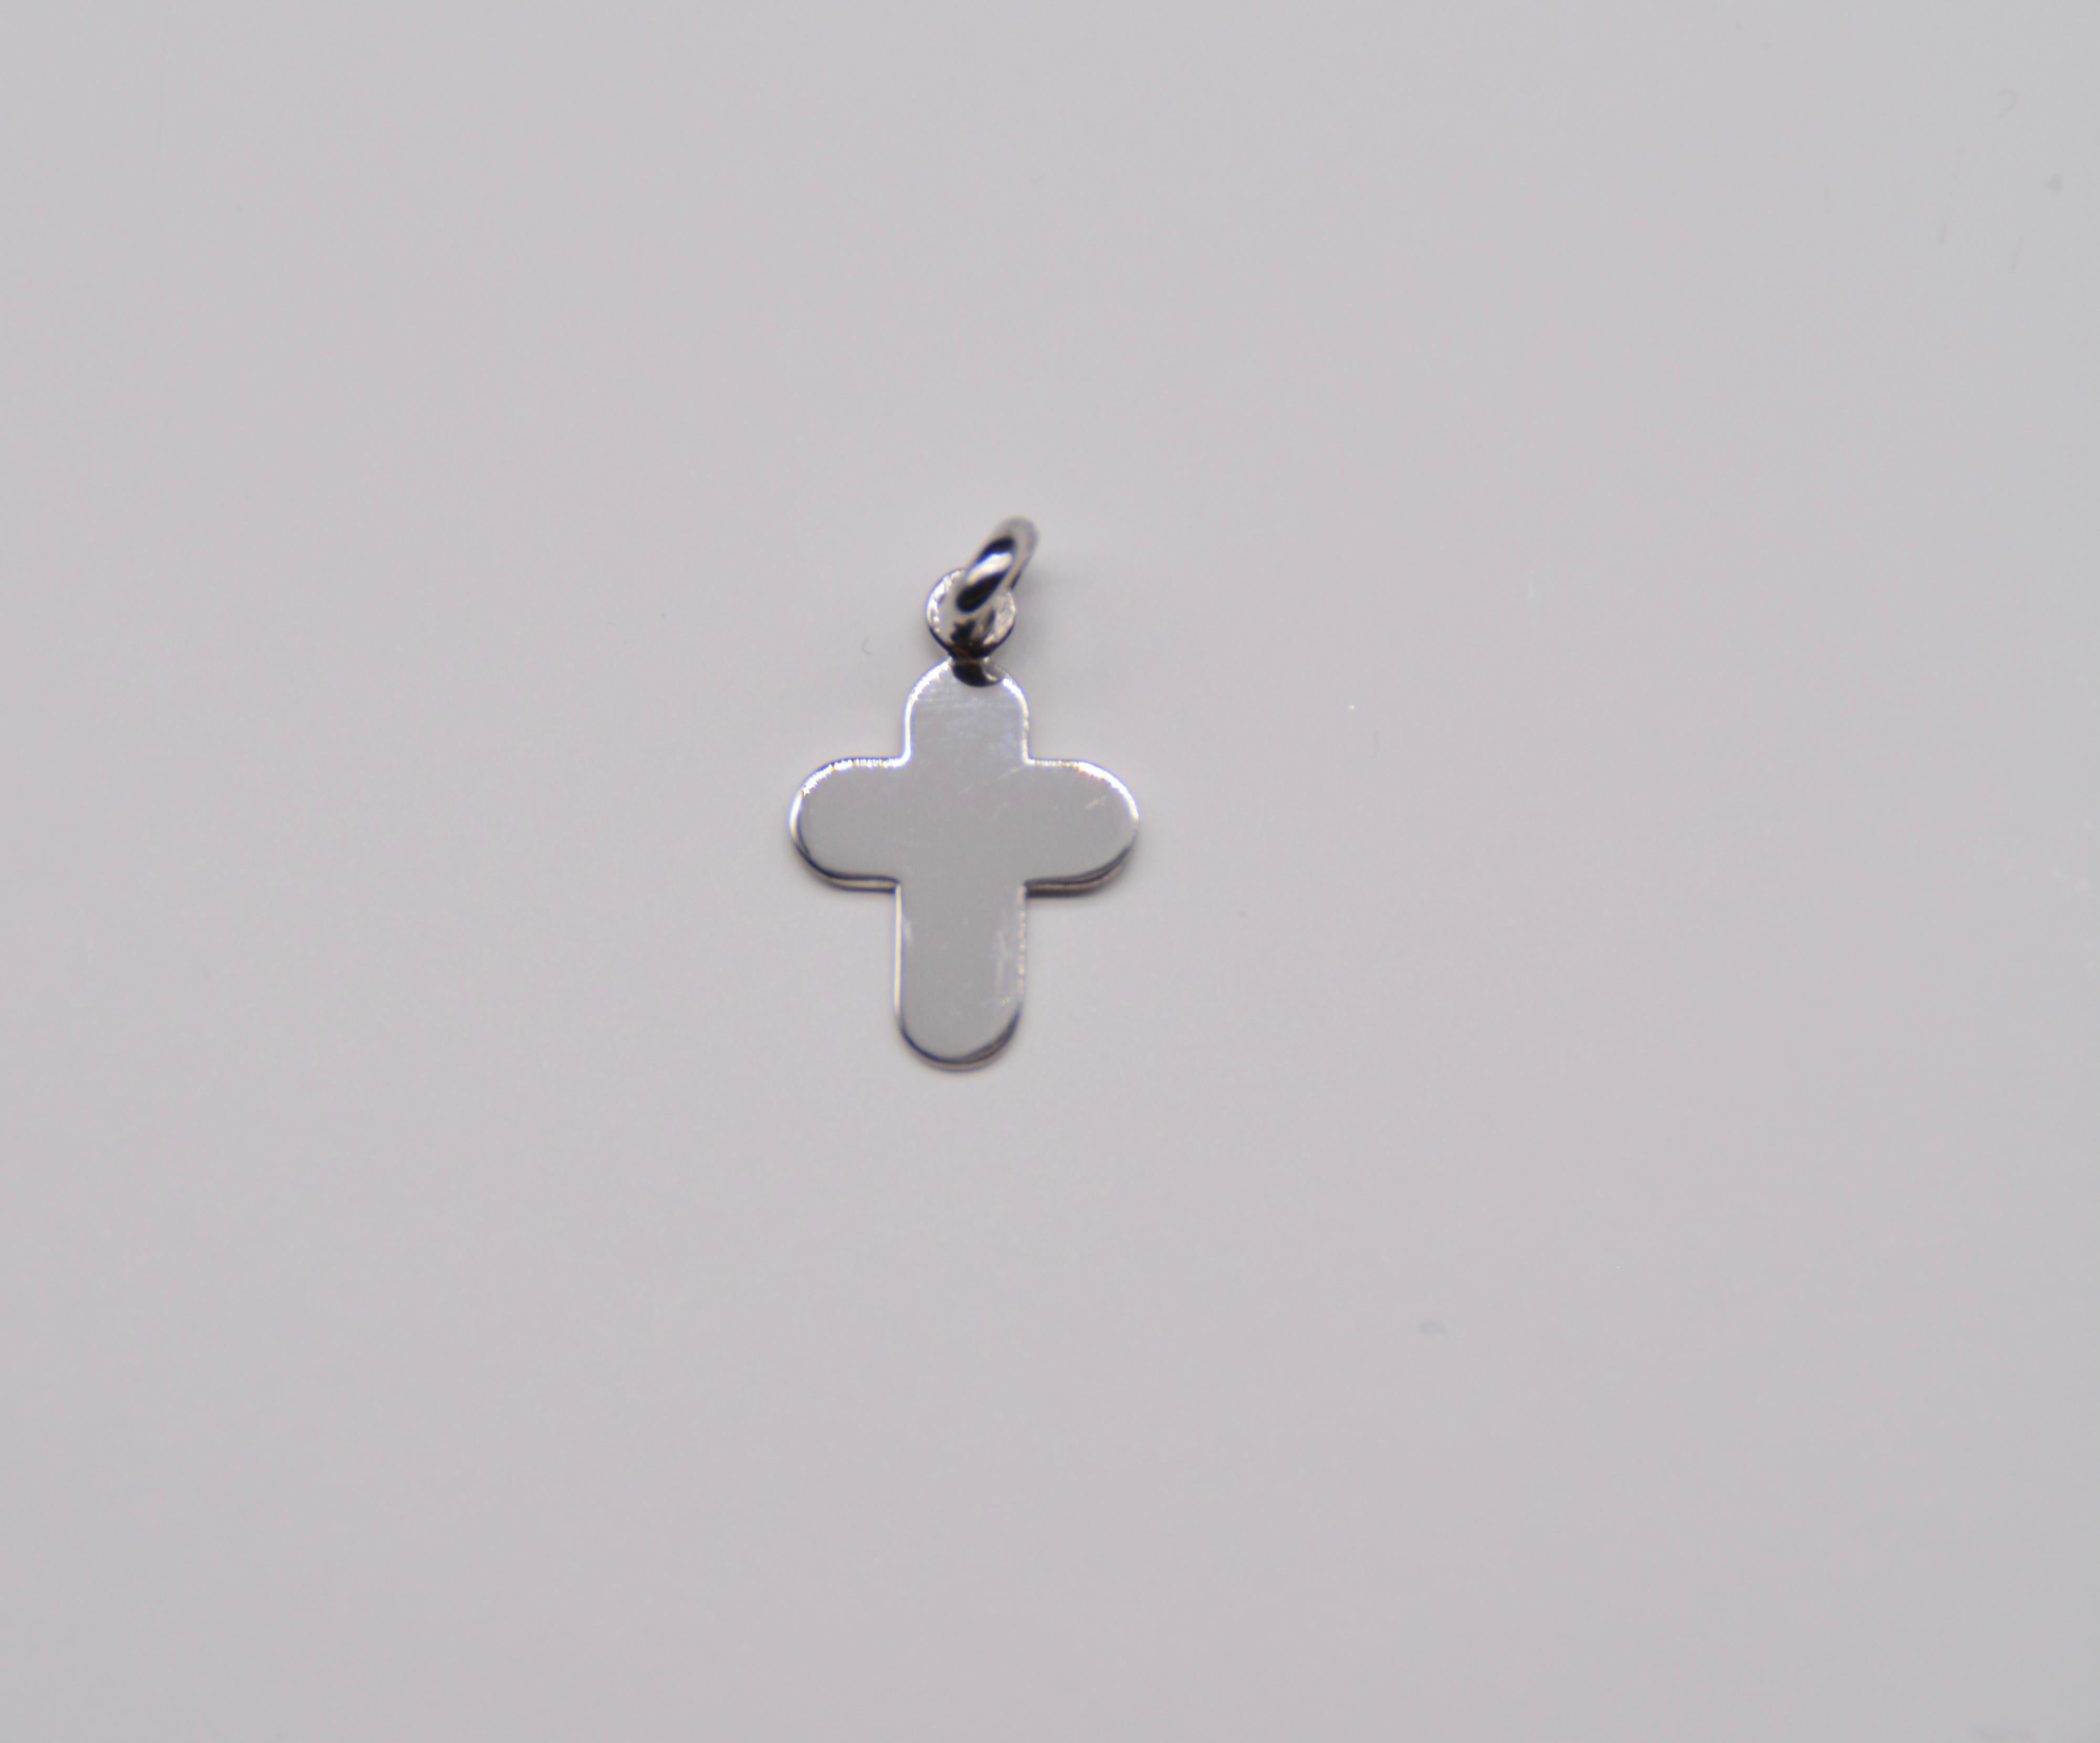 French Cross Pendant Small Model Round in White Gold

A cross-shaped pendant with rounded edges in white gold, measuring 13mm high without the ring and 11mm wide. This pendant is particularly suitable as a gift for christenings and communions due to